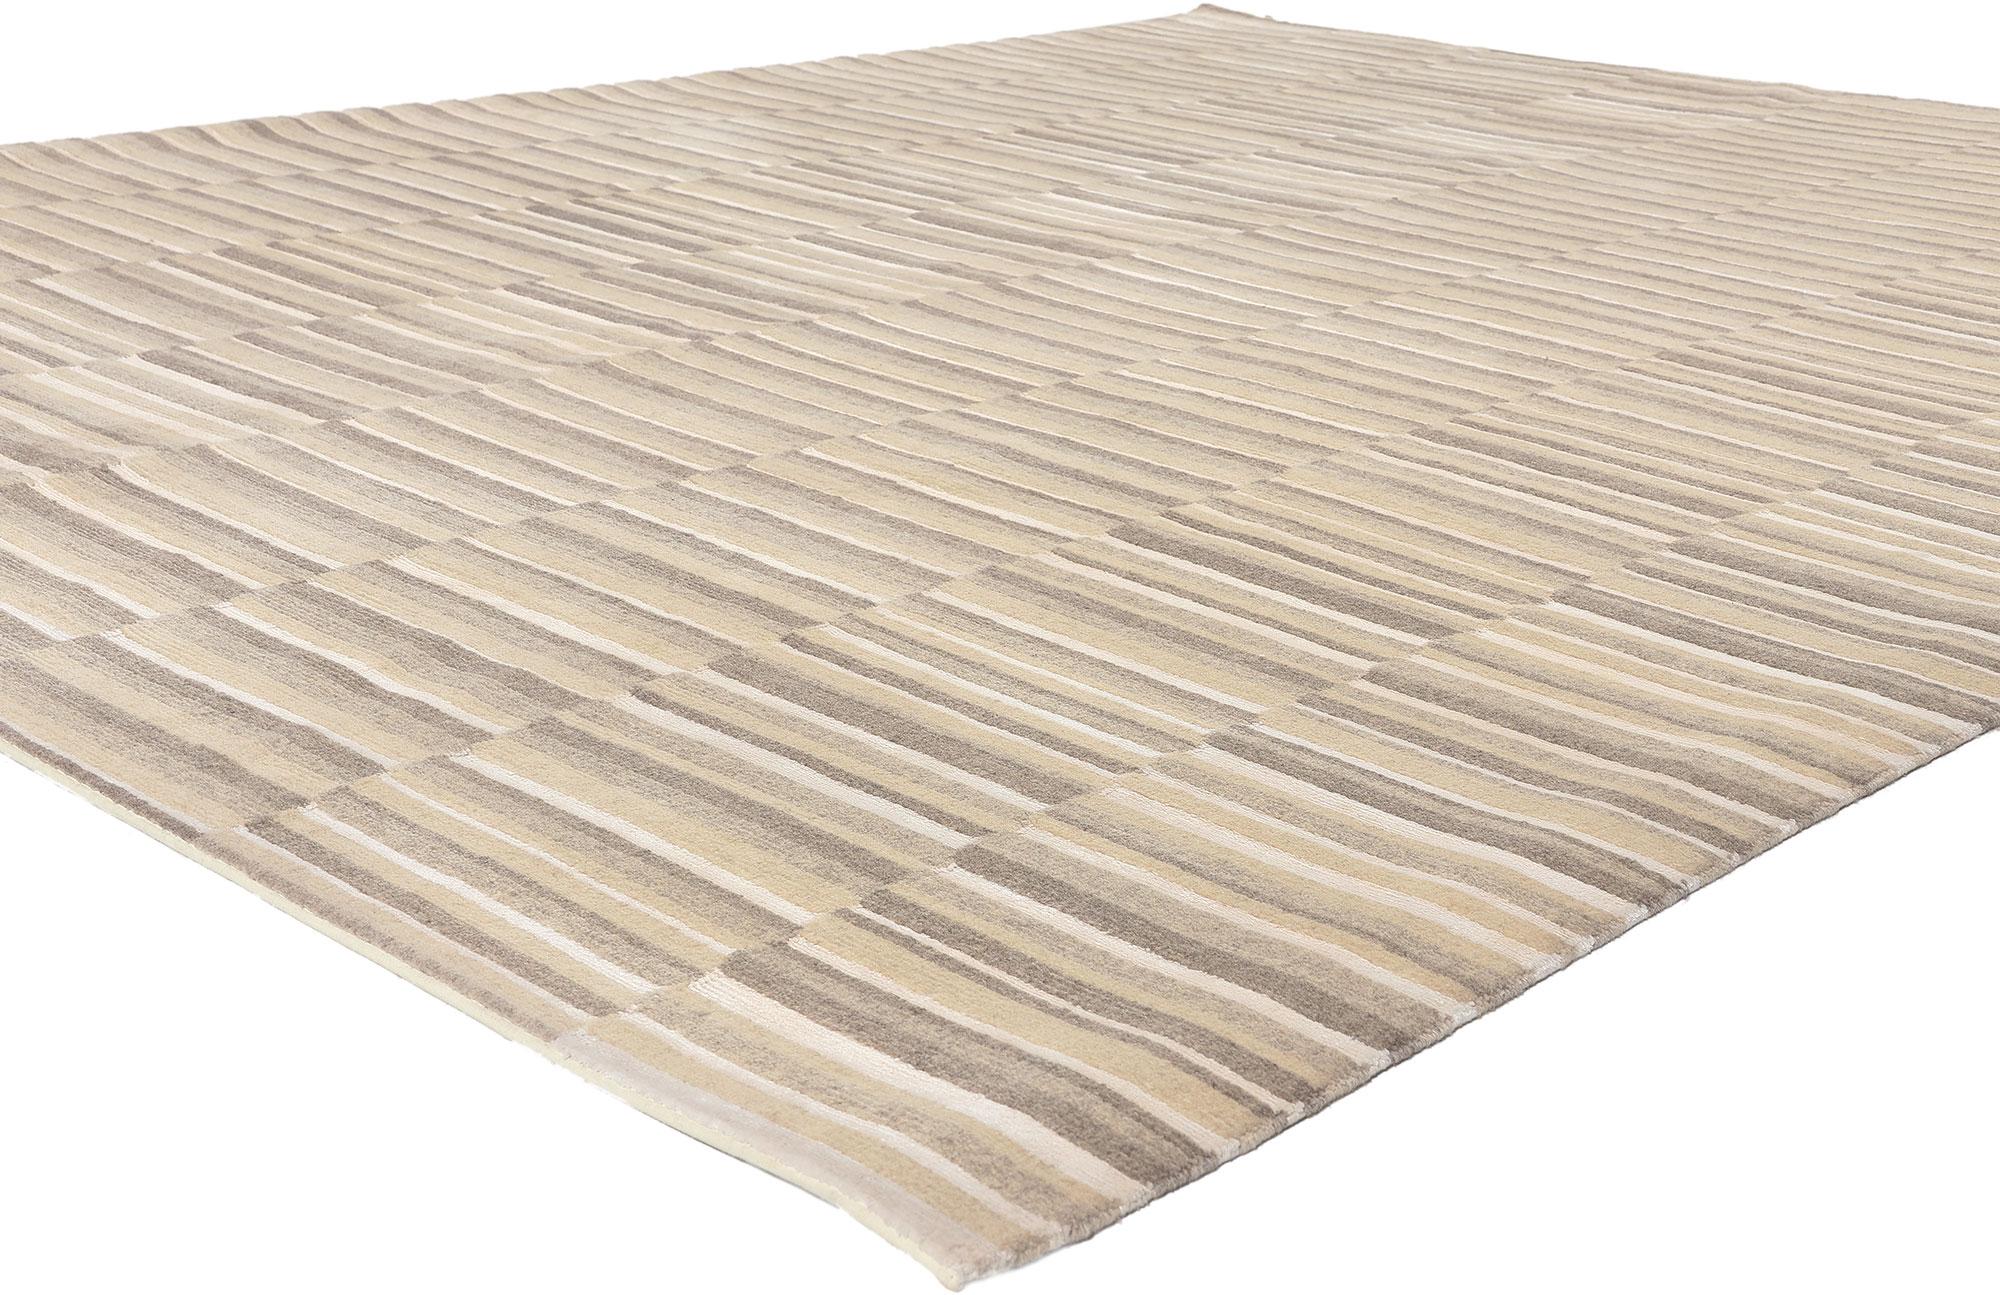 30231 Neutral Striped Area Rug, 07'08 x 09'11.
Sublime simplicity meets Wabi-Sabi in this neutral striped area rug. The perfectly imperfect striped design and neutral colors woven into this piece work together creating a modern look without the